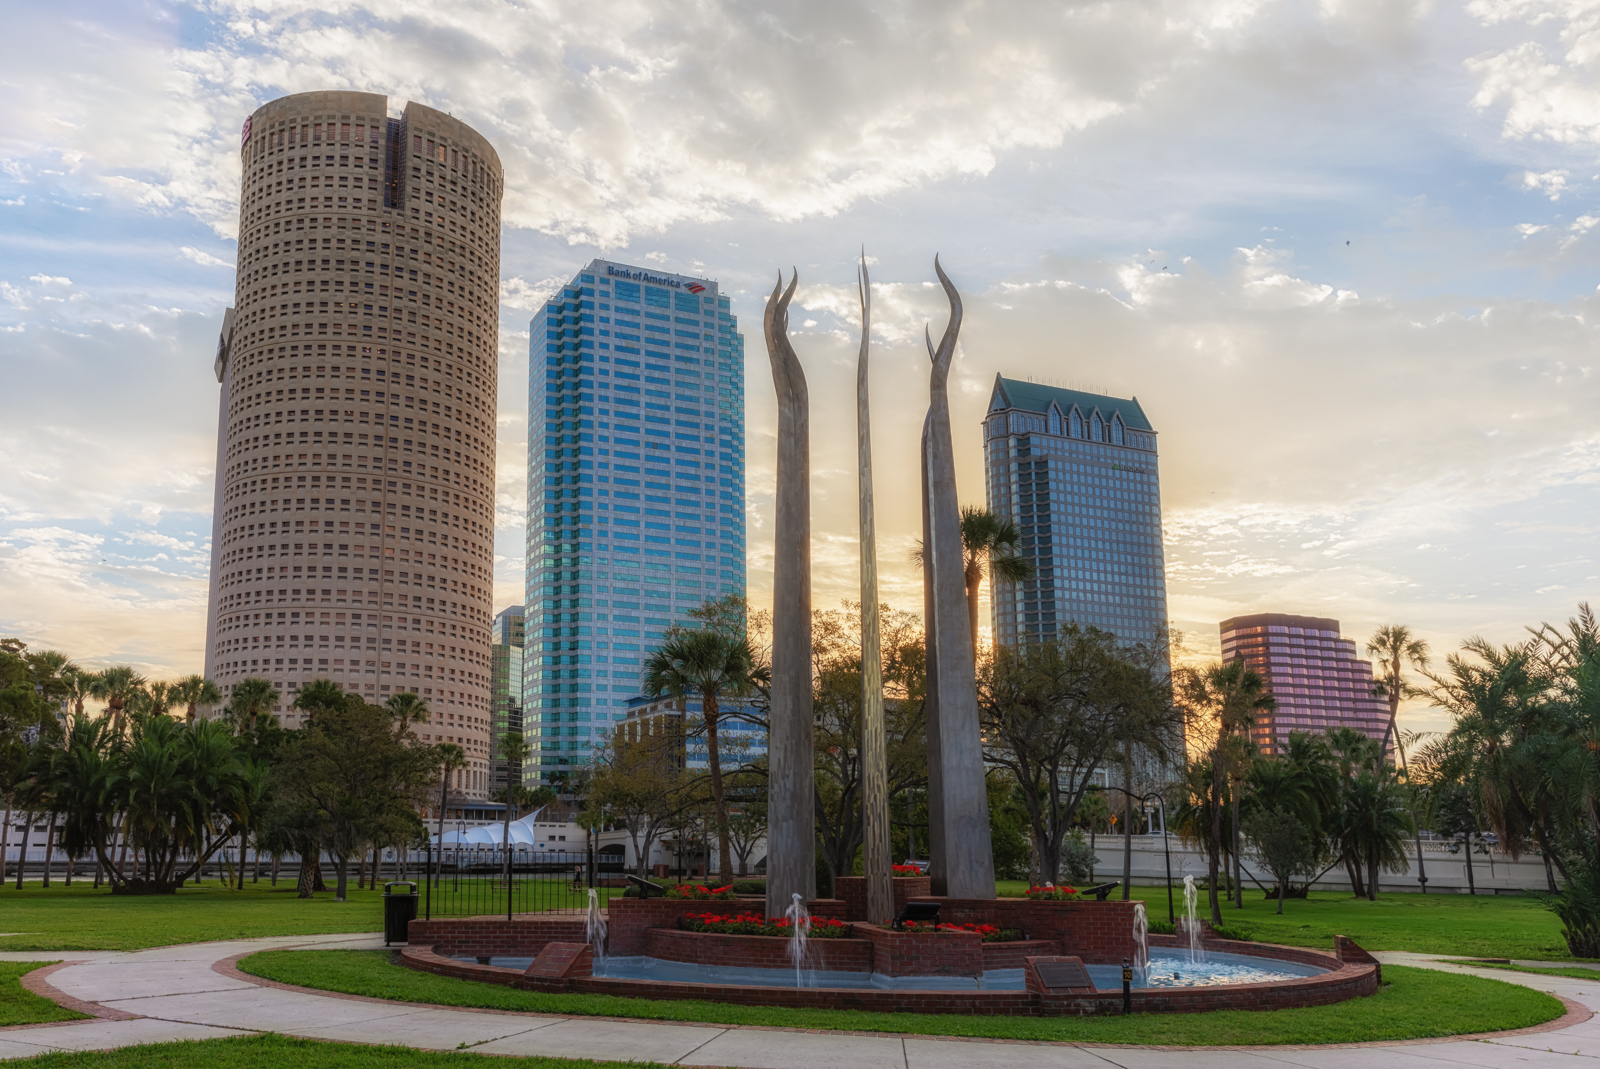 Sticks of Fire Sculpture and Tampa